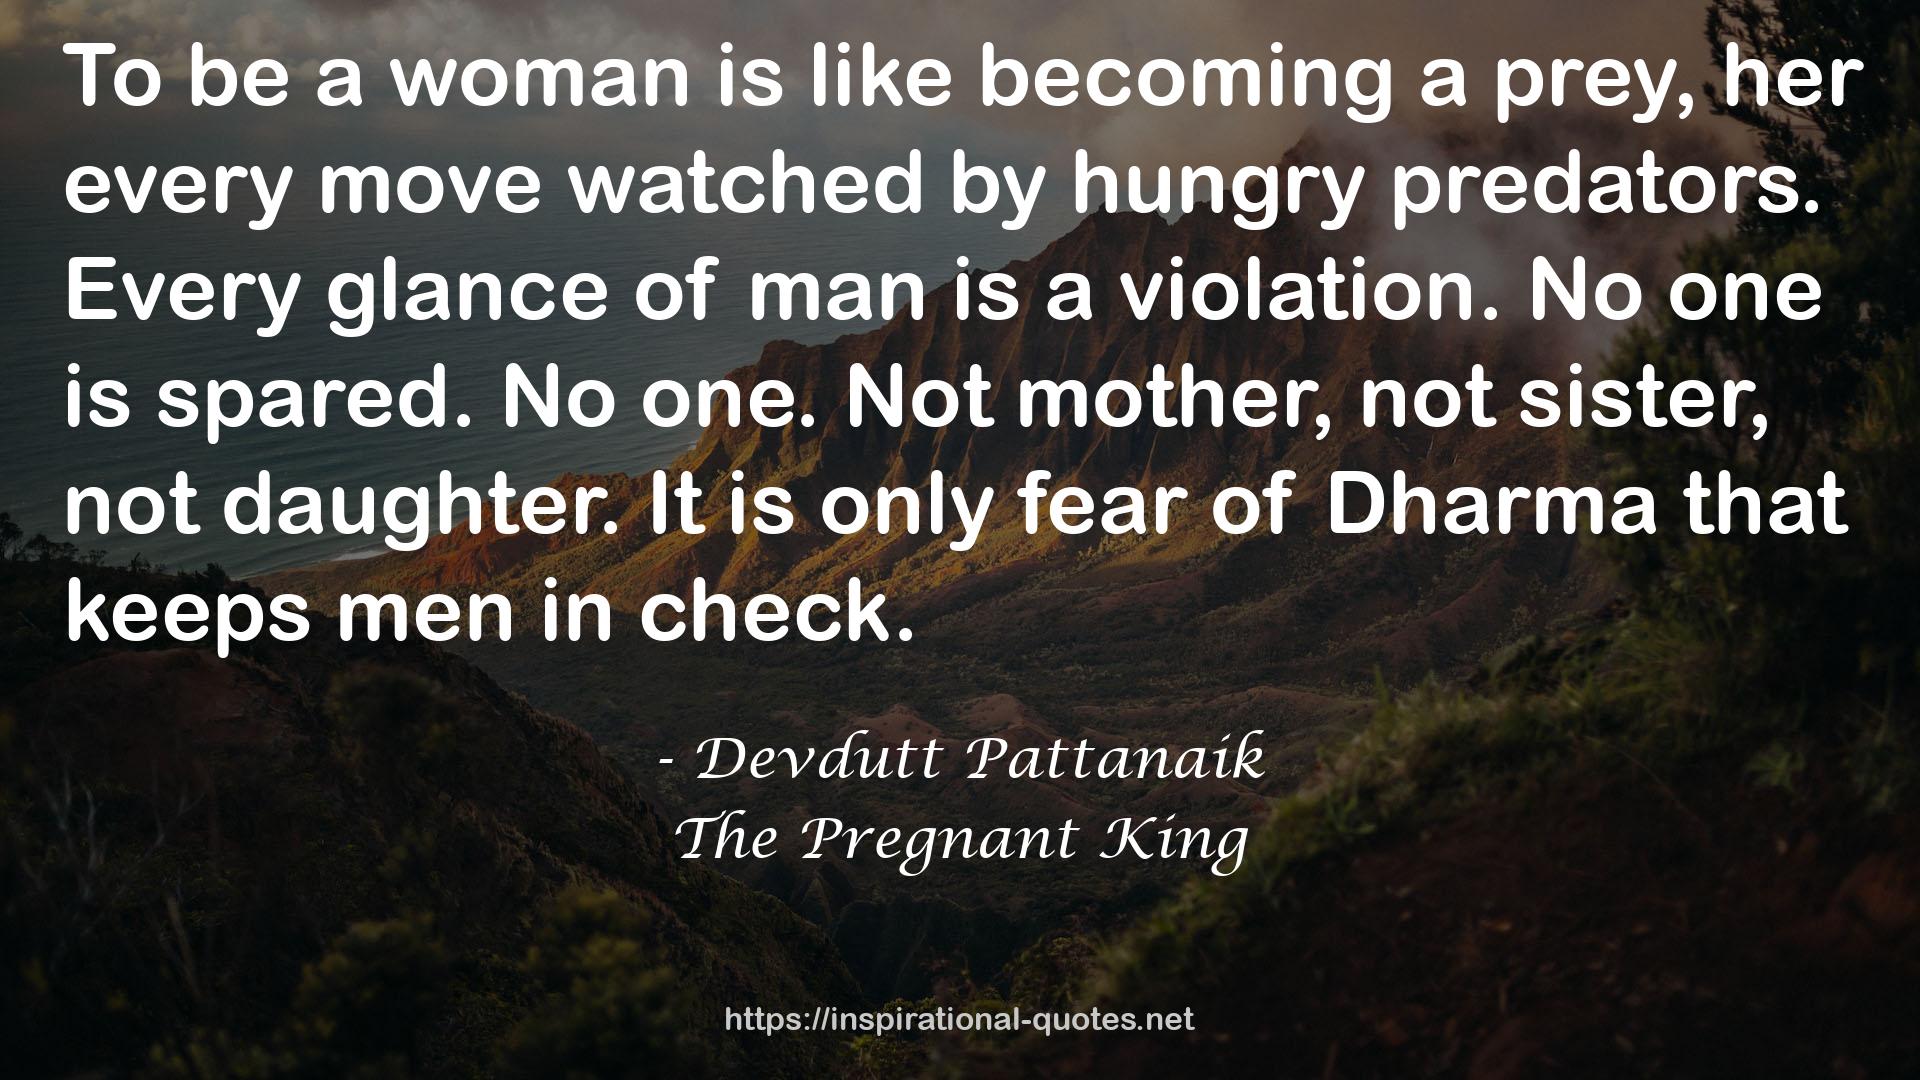 The Pregnant King QUOTES